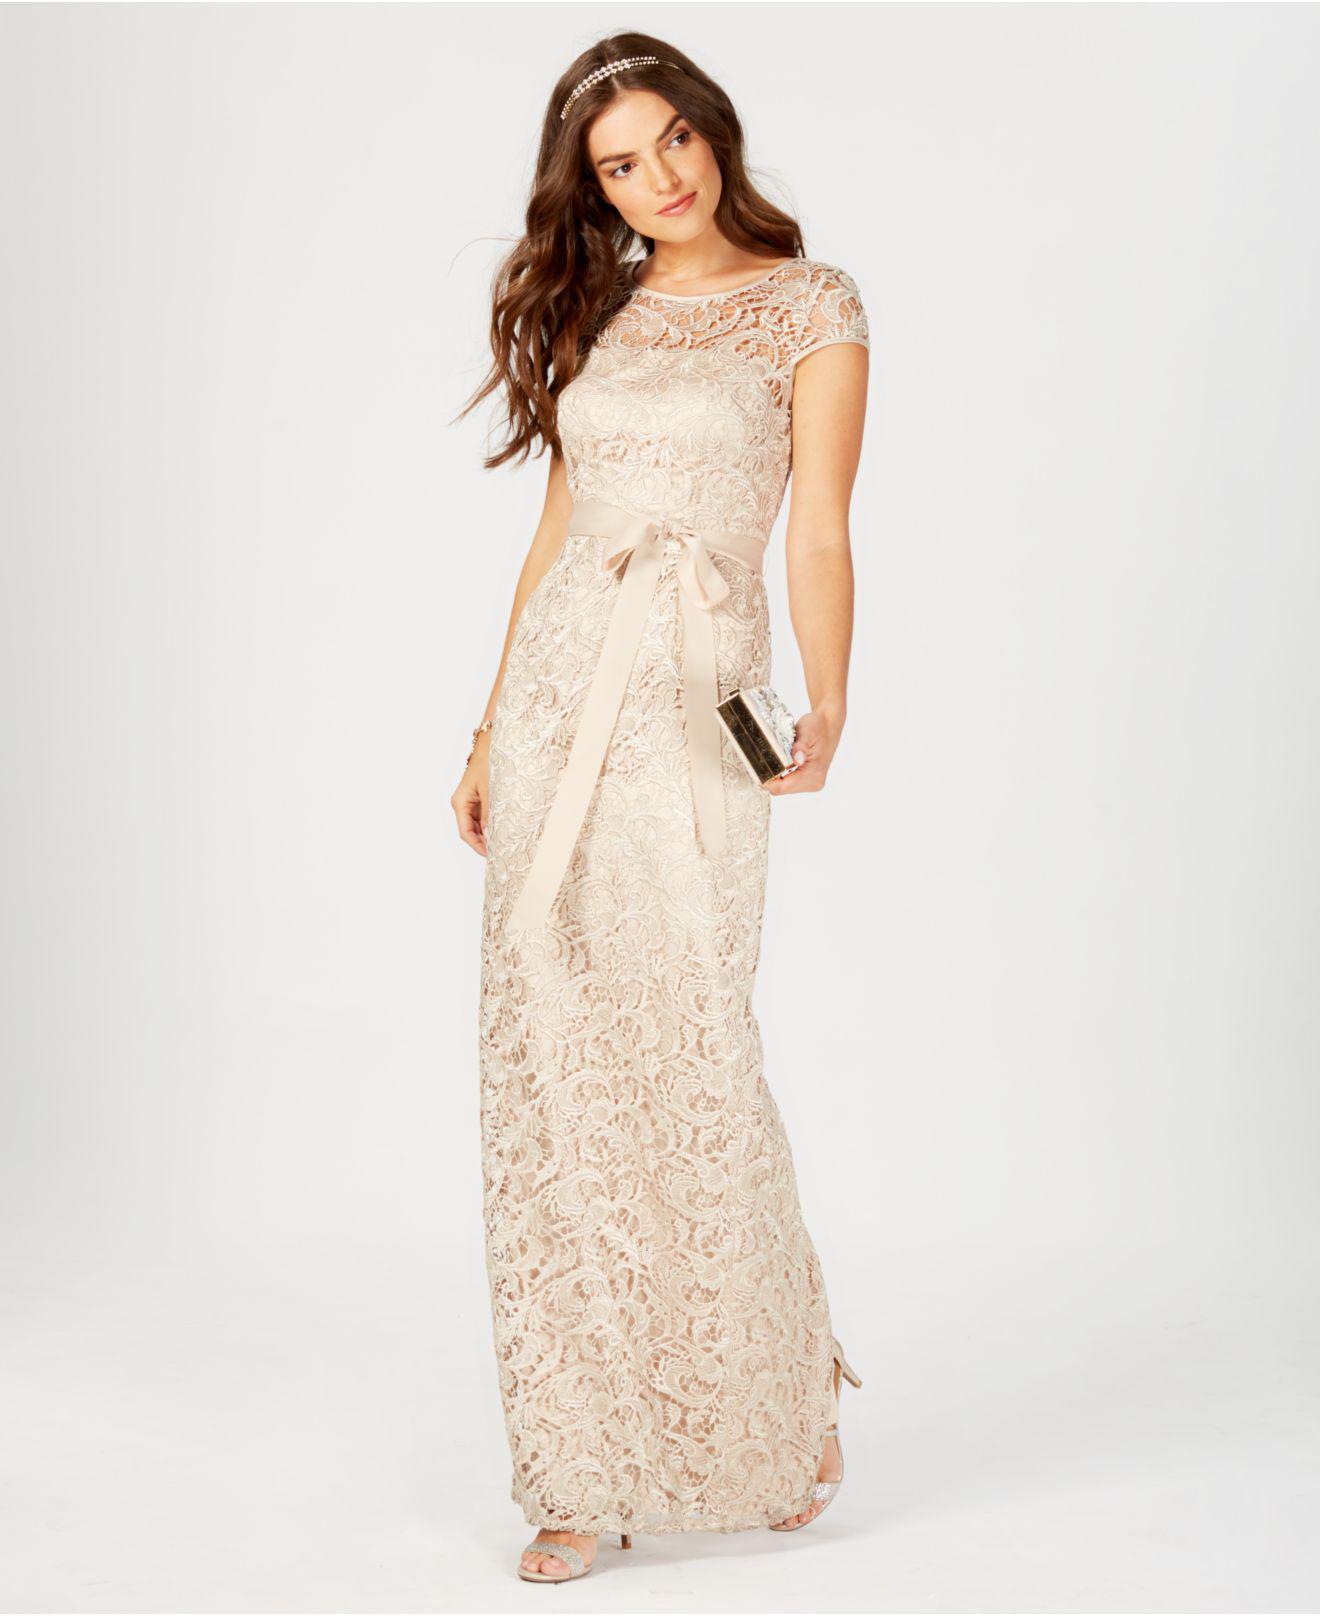 Adrianna Papell Lace Cap-Sleeve Gown in Almond (Natural) - Lyst